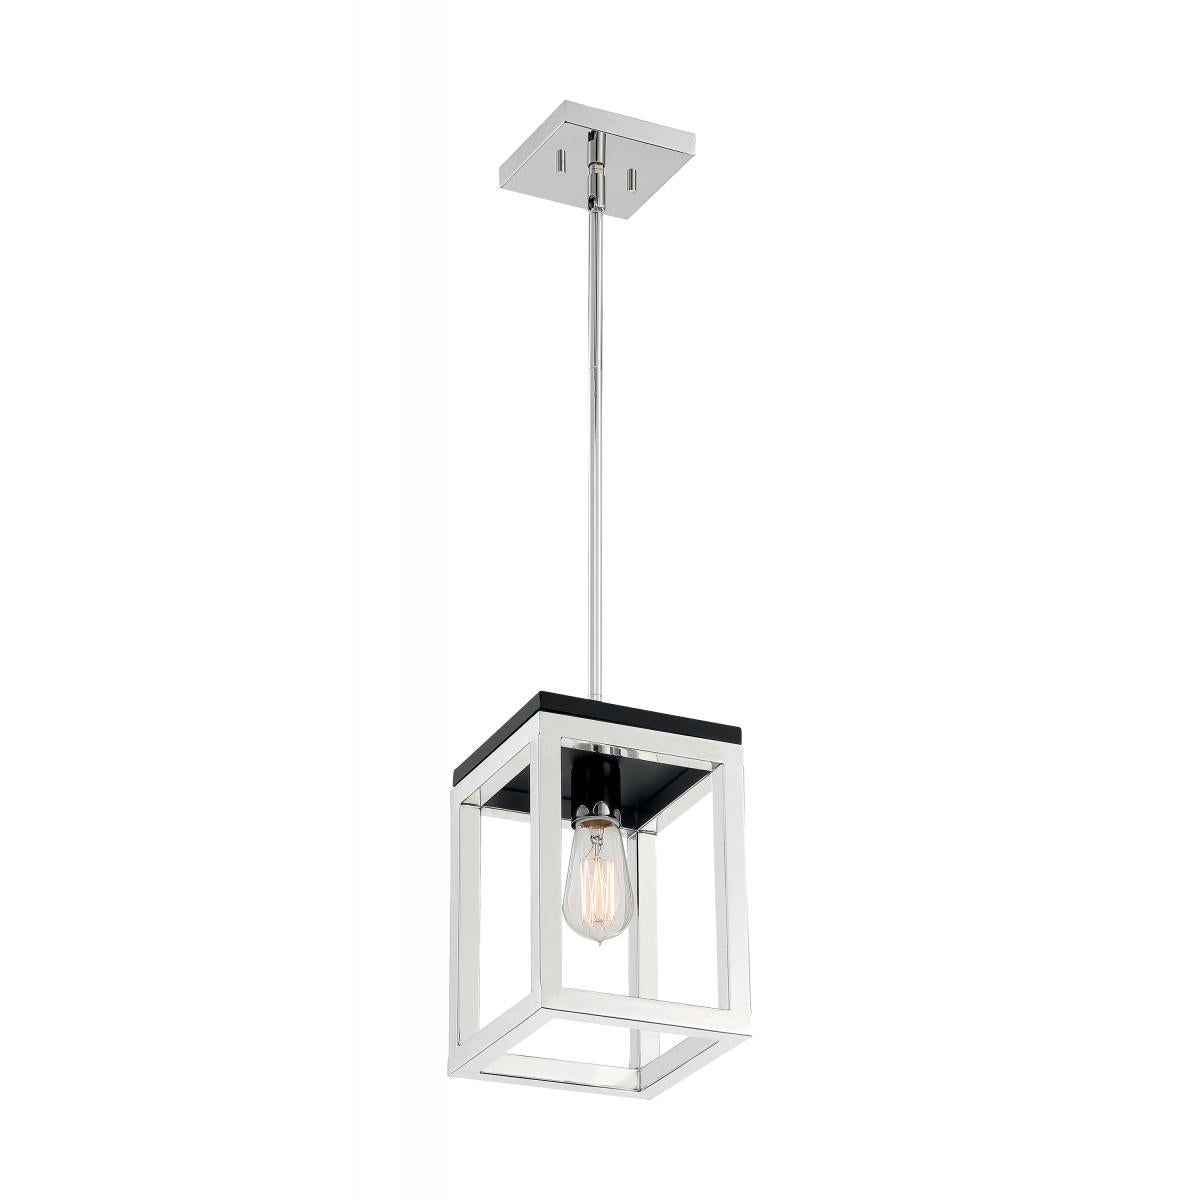 Cakewalk 1 Light Pendant with Polished Nickel and Black Accents Finish